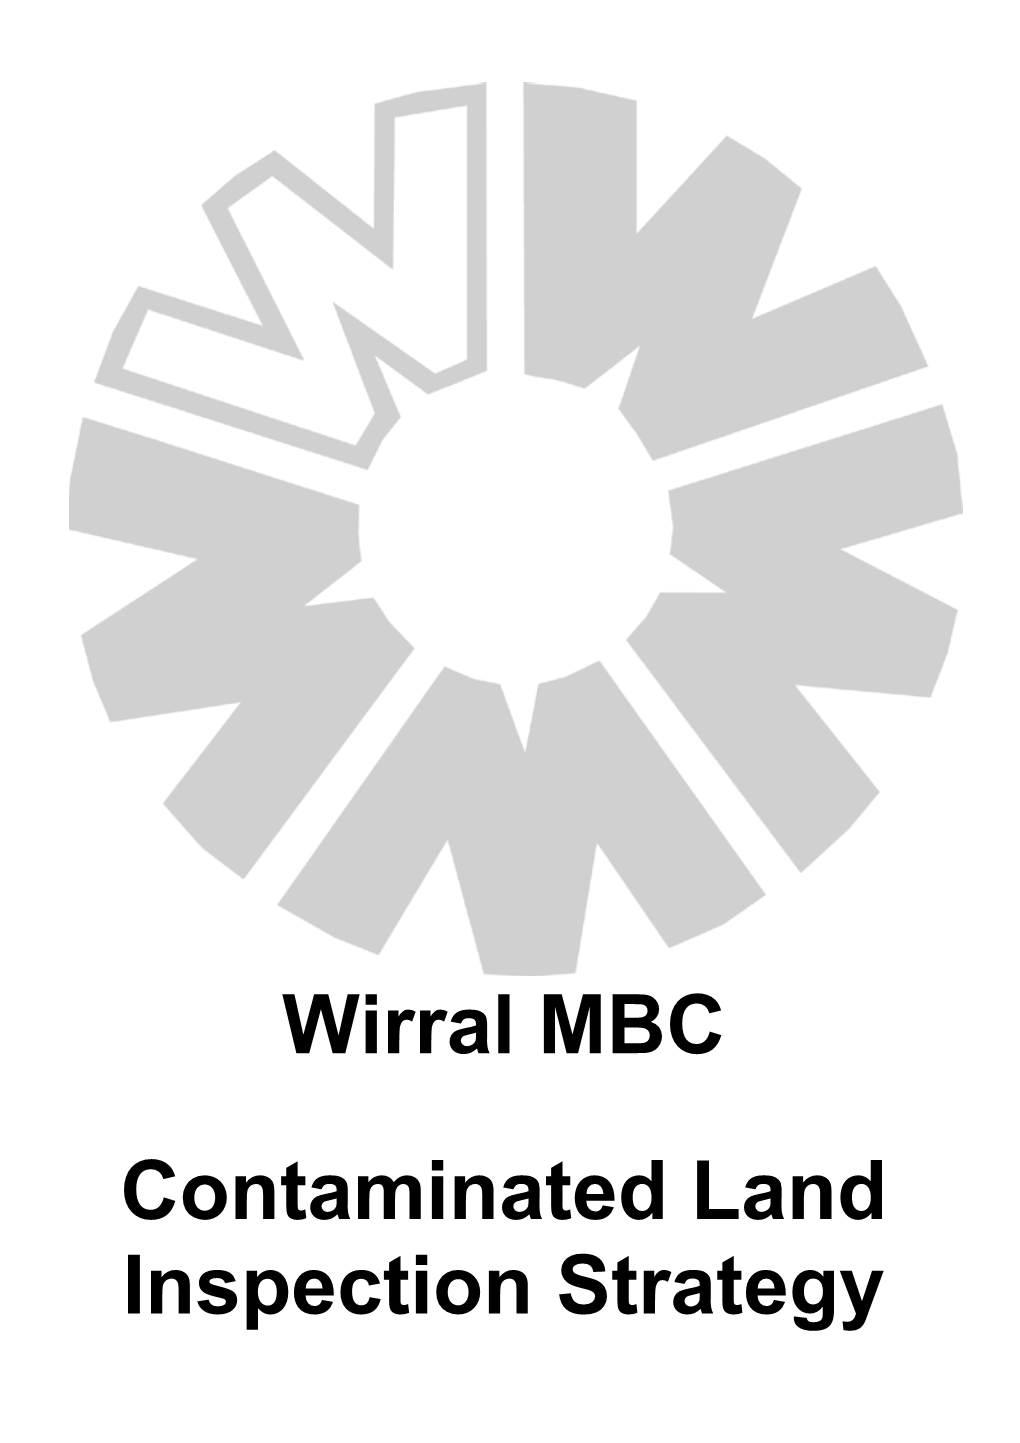 Wirral Council's Contaminated Land Inspection Strategy